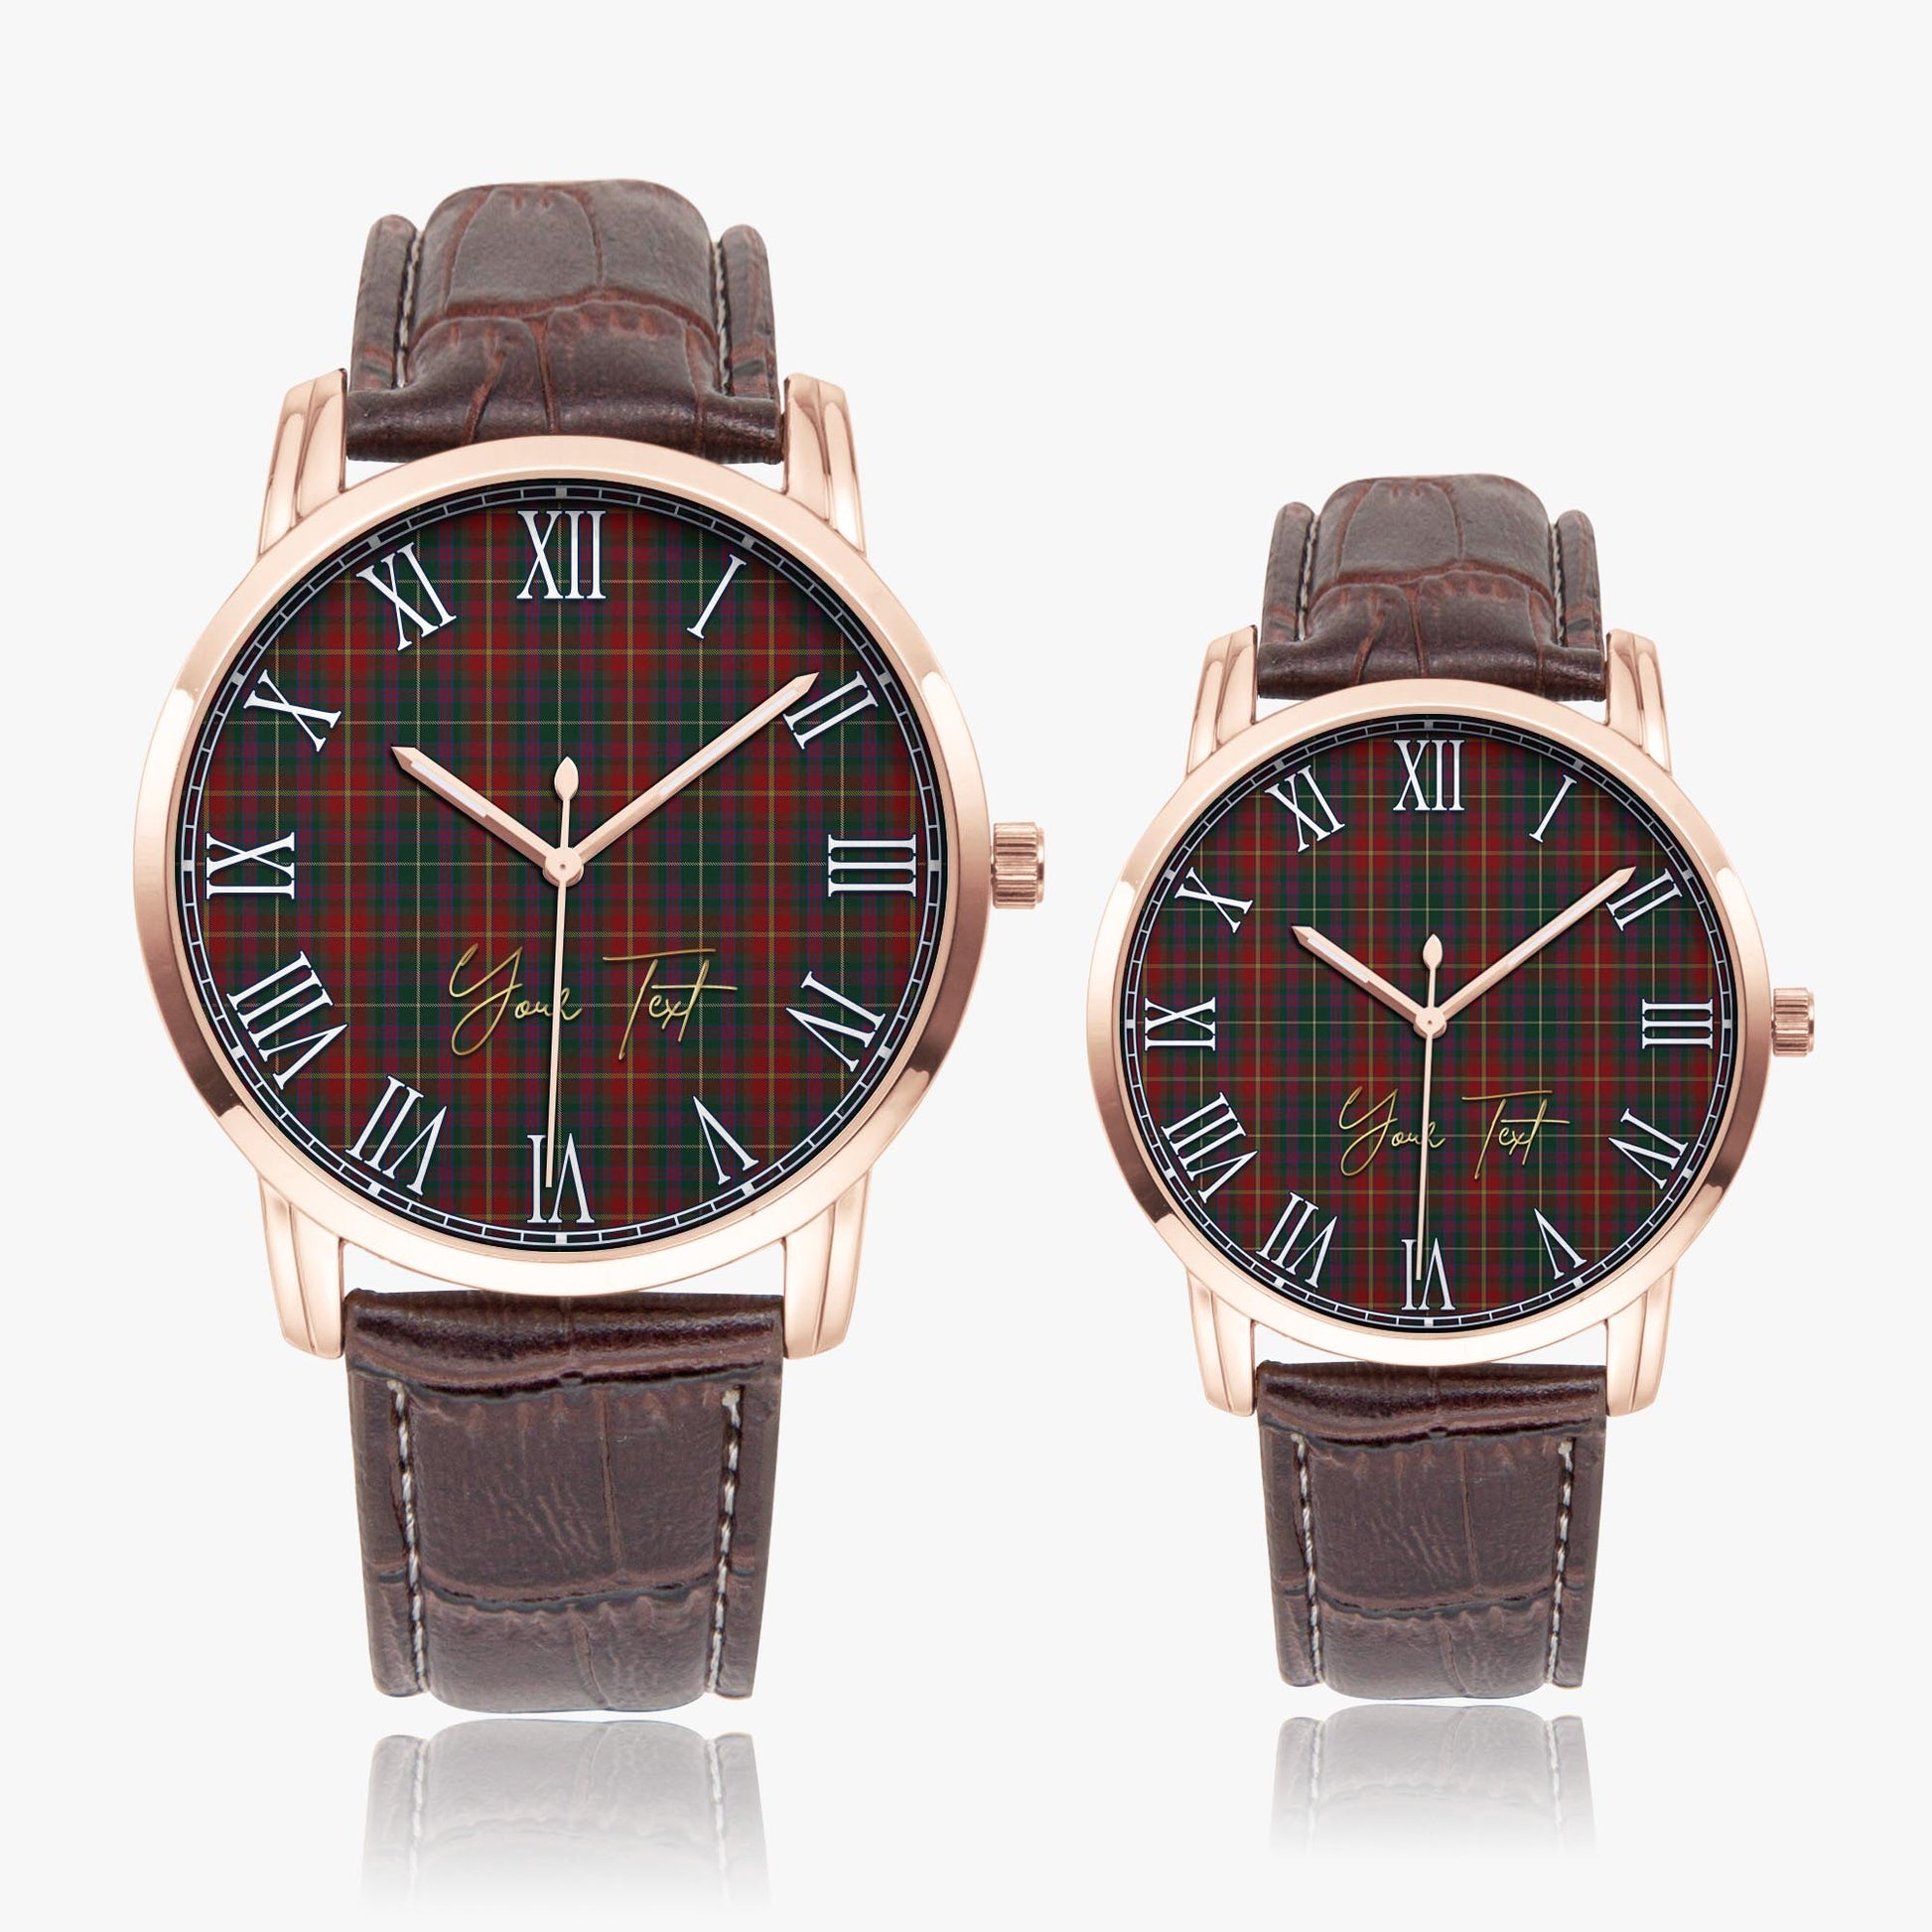 Meath County Ireland Tartan Personalized Your Text Leather Trap Quartz Watch Wide Type Rose Gold Case With Brown Leather Strap - Tartanvibesclothing